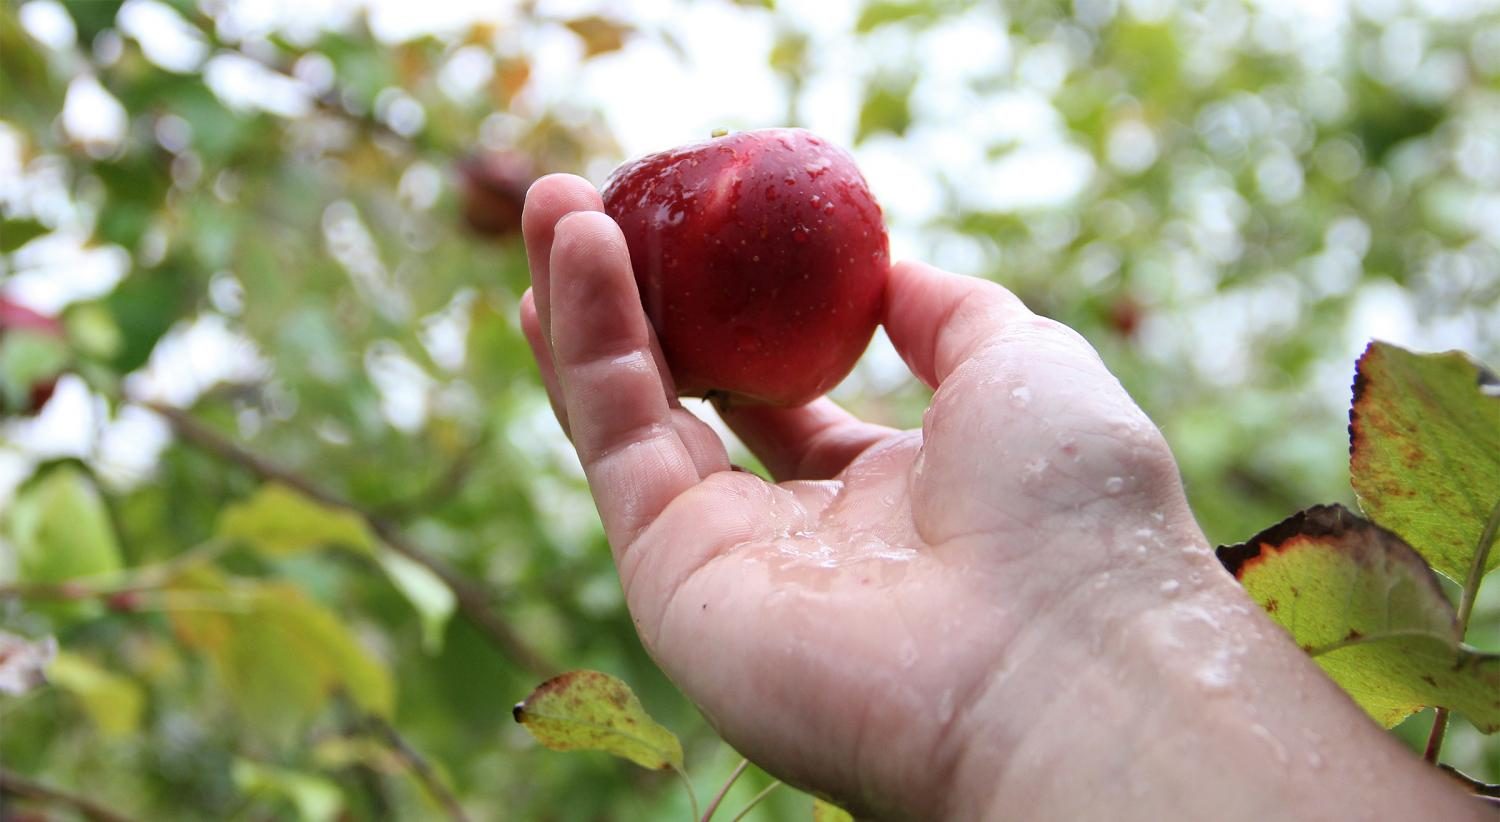 Senior Sabrina Ruckers family picked their own apples and brewed their own cider this year. [We] went to the apple orchard specifically to find the perfect combination for apple cider, Rucker said. 